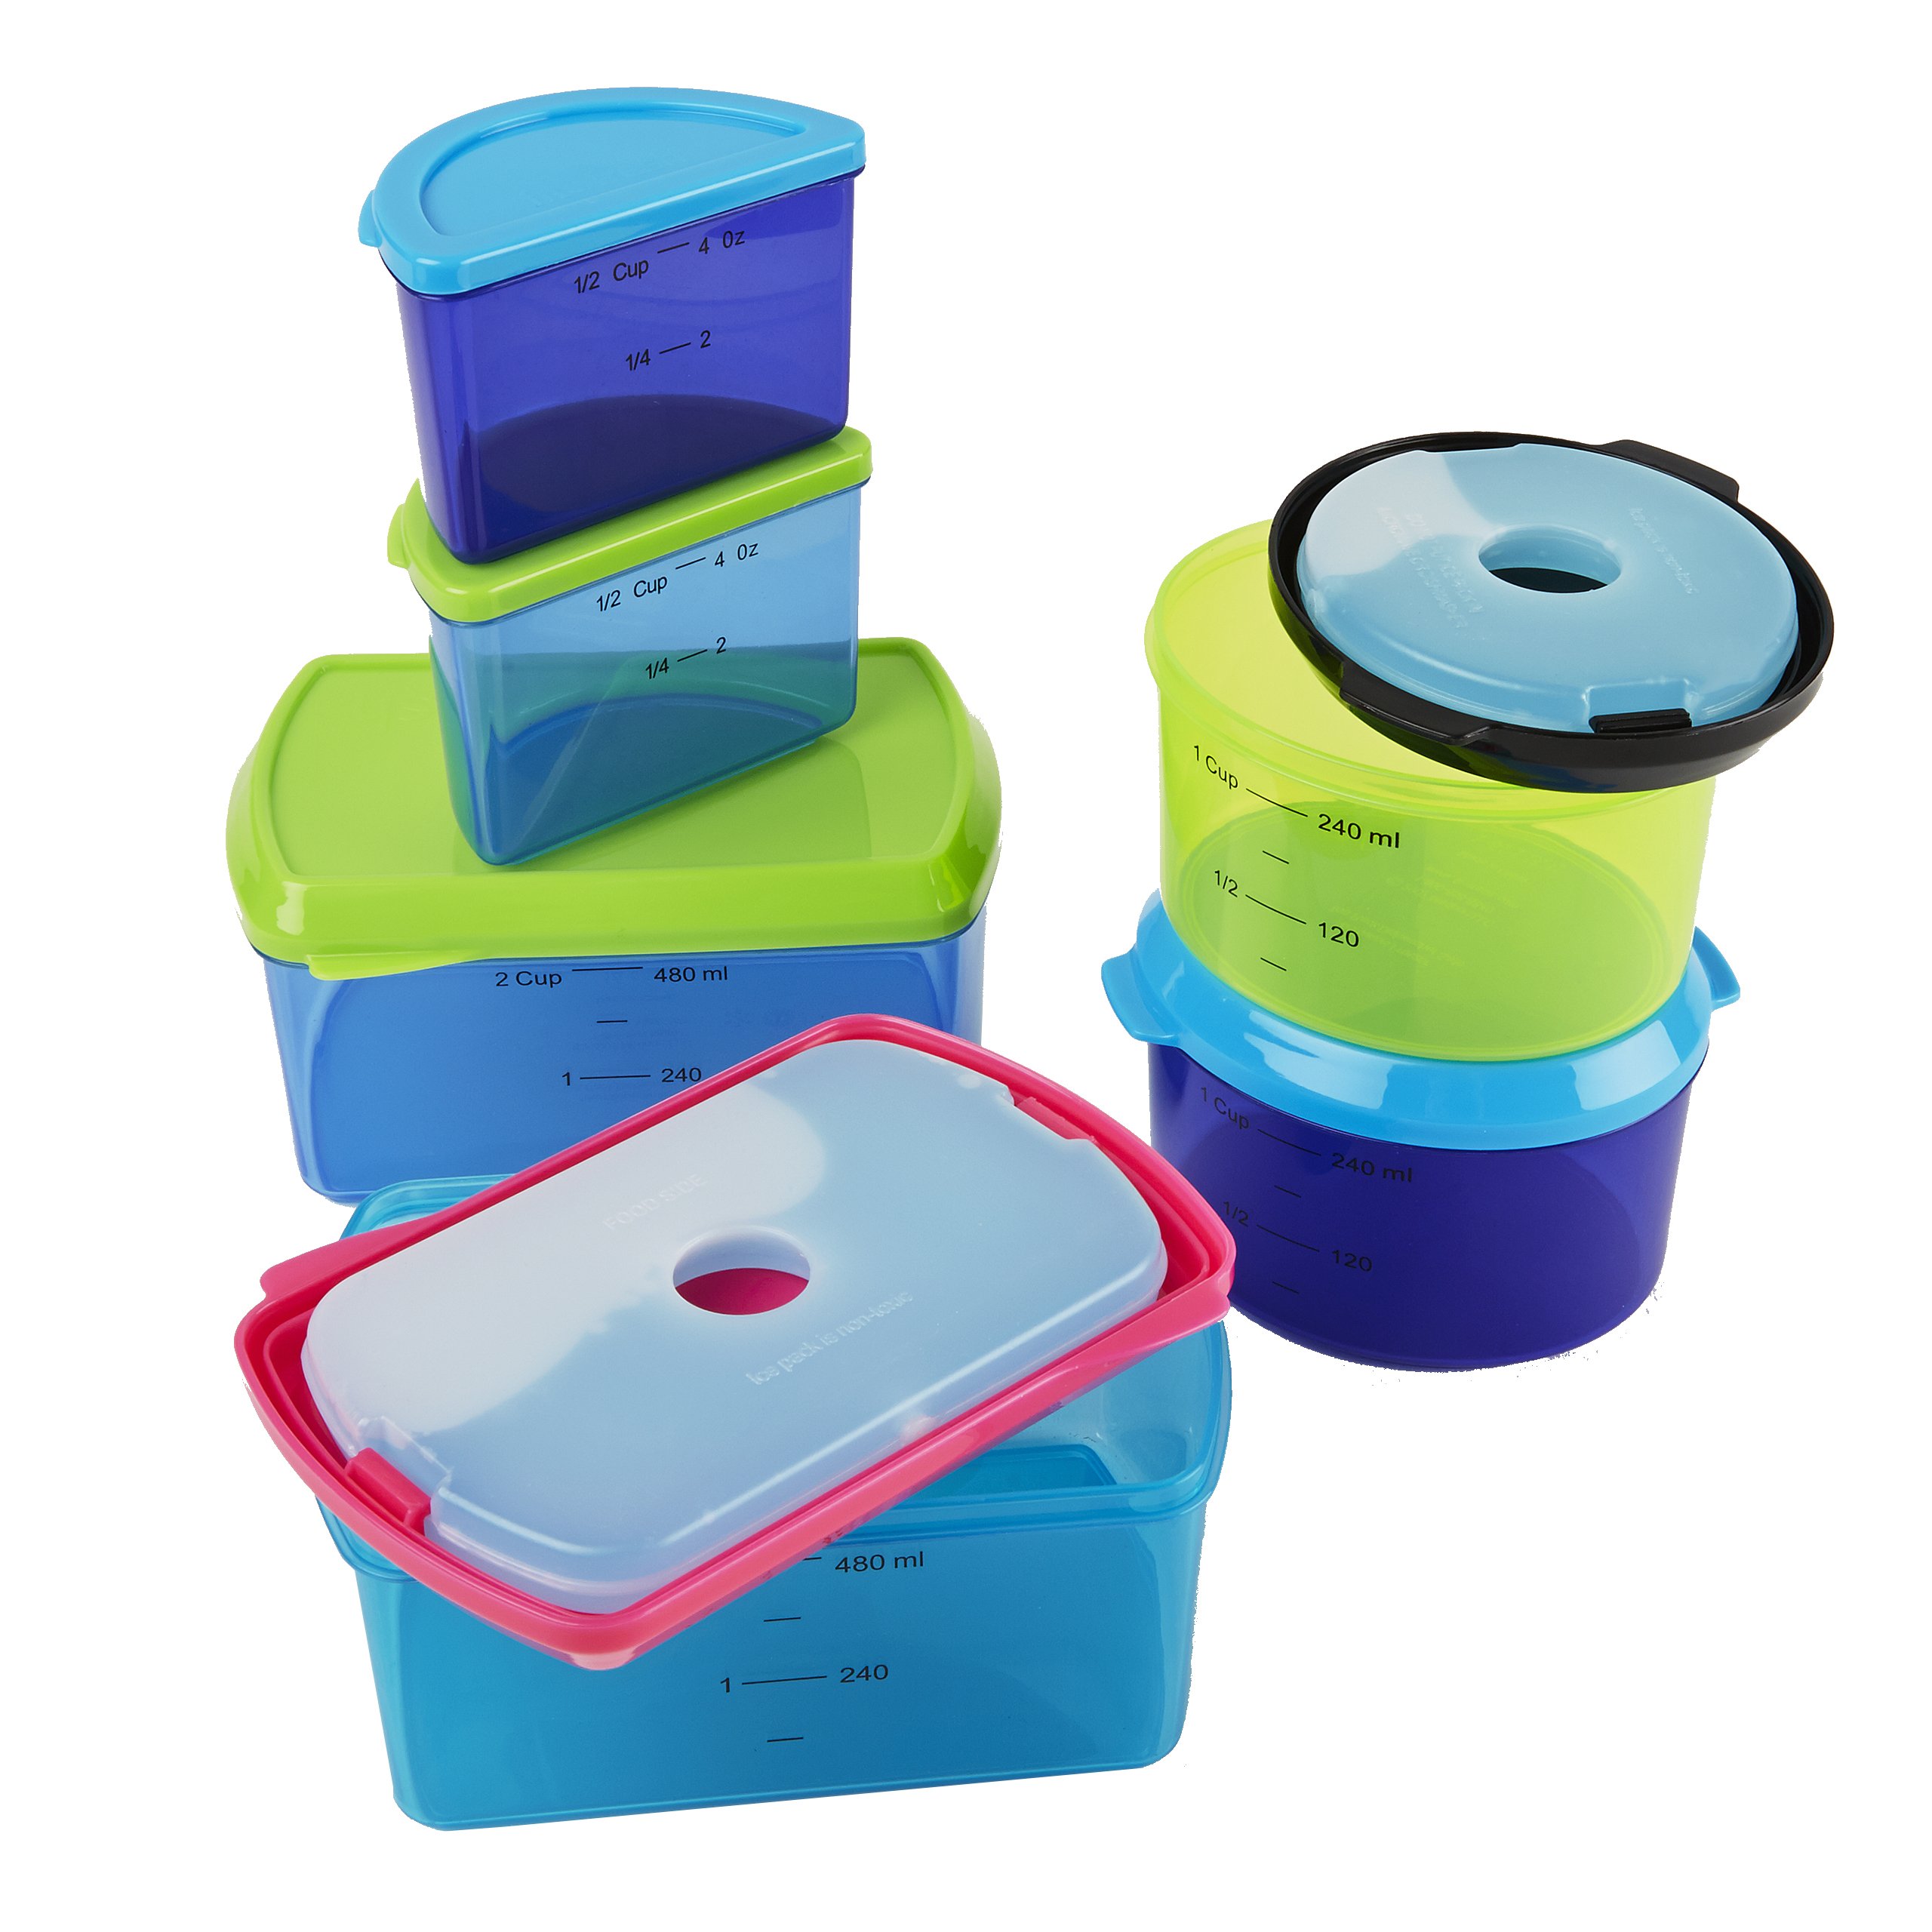 Fit and Fresh Containers Healthy Living Smart Portion 2 Cup Size 10 Pieces,  ECW1636539, 700522000000, Fit and Fresh